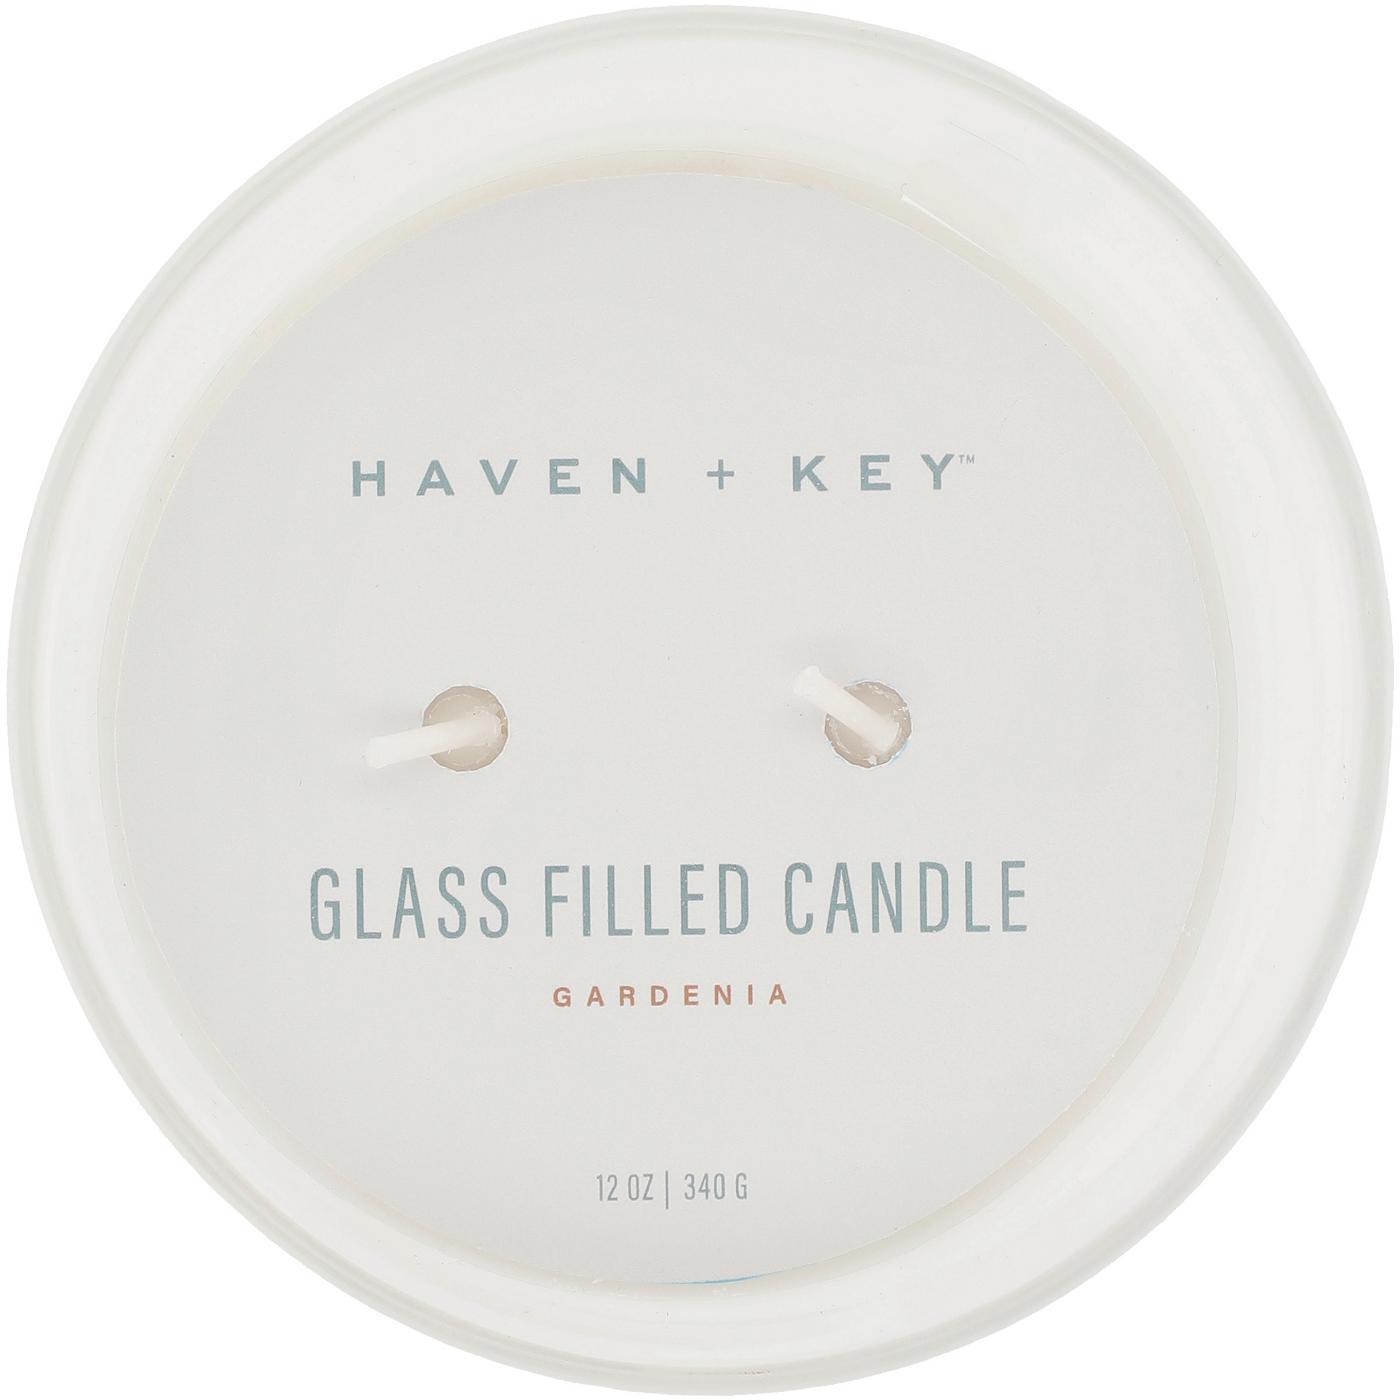 Haven + Key Gardenia Scented Candle; image 2 of 2